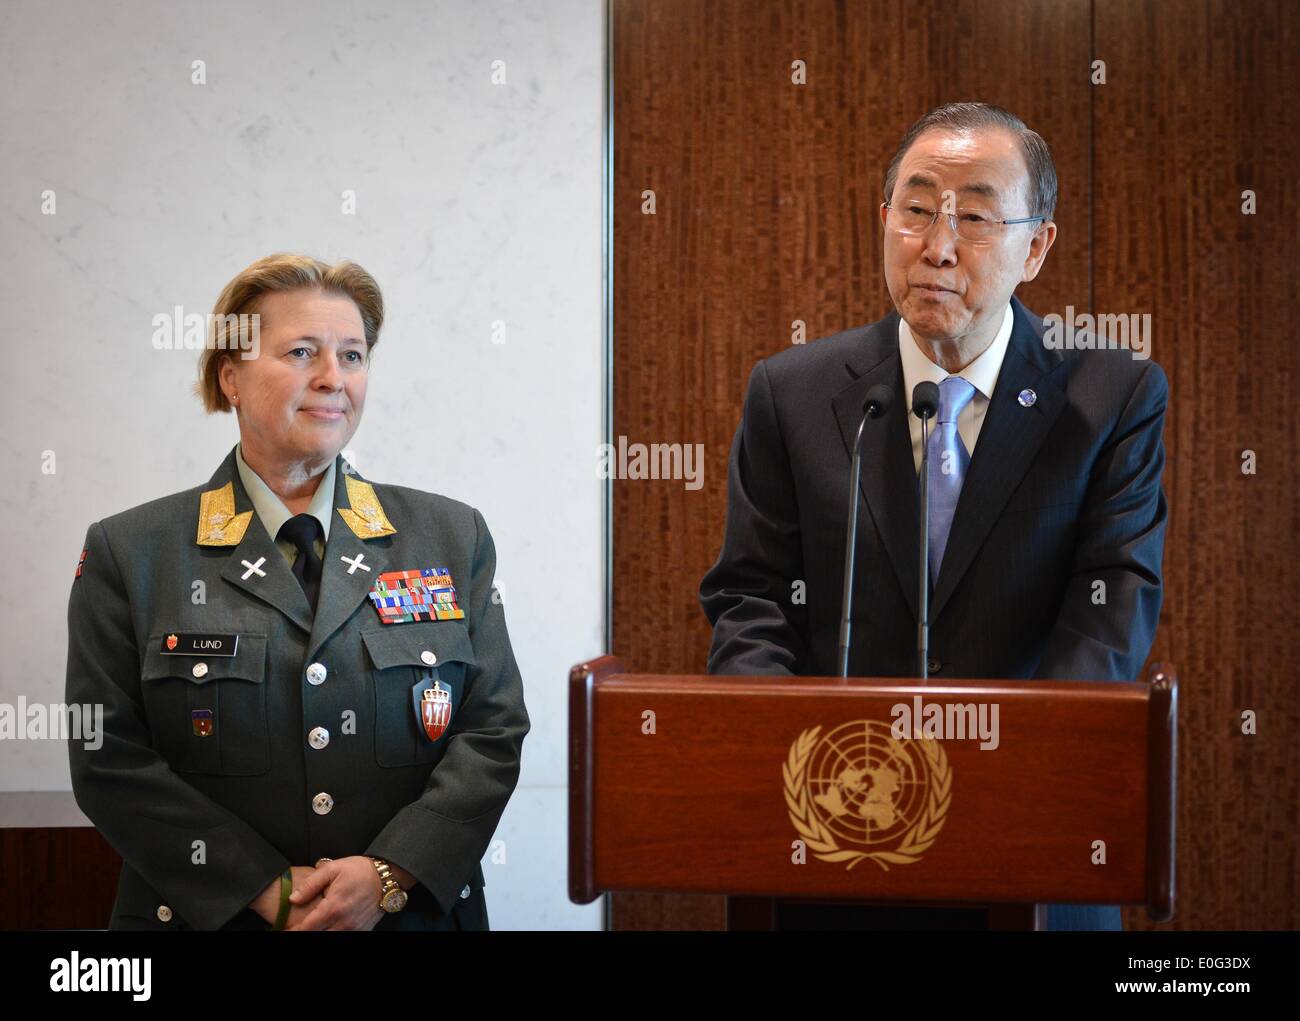 New York, UN headquarters in New York. 12th May, 2014. Major General Kristin Lund (L) looks on as United Nations Secretary-General Ban Ki-moon speaks during a photo opportunity after she was appointed as the commander of the UN peacekeeping force in Cyprus, at the UN headquarters in New York, on May 12, 2014. UN chief Ban Ki-moon on Monday named Major General Kristin Lund to take command of the UN peacekeeping force in Cyprus. The Norwegian commander will be the first female to command a UN force. © Niu Xiaolei/Xinhua/Alamy Live News Stock Photo